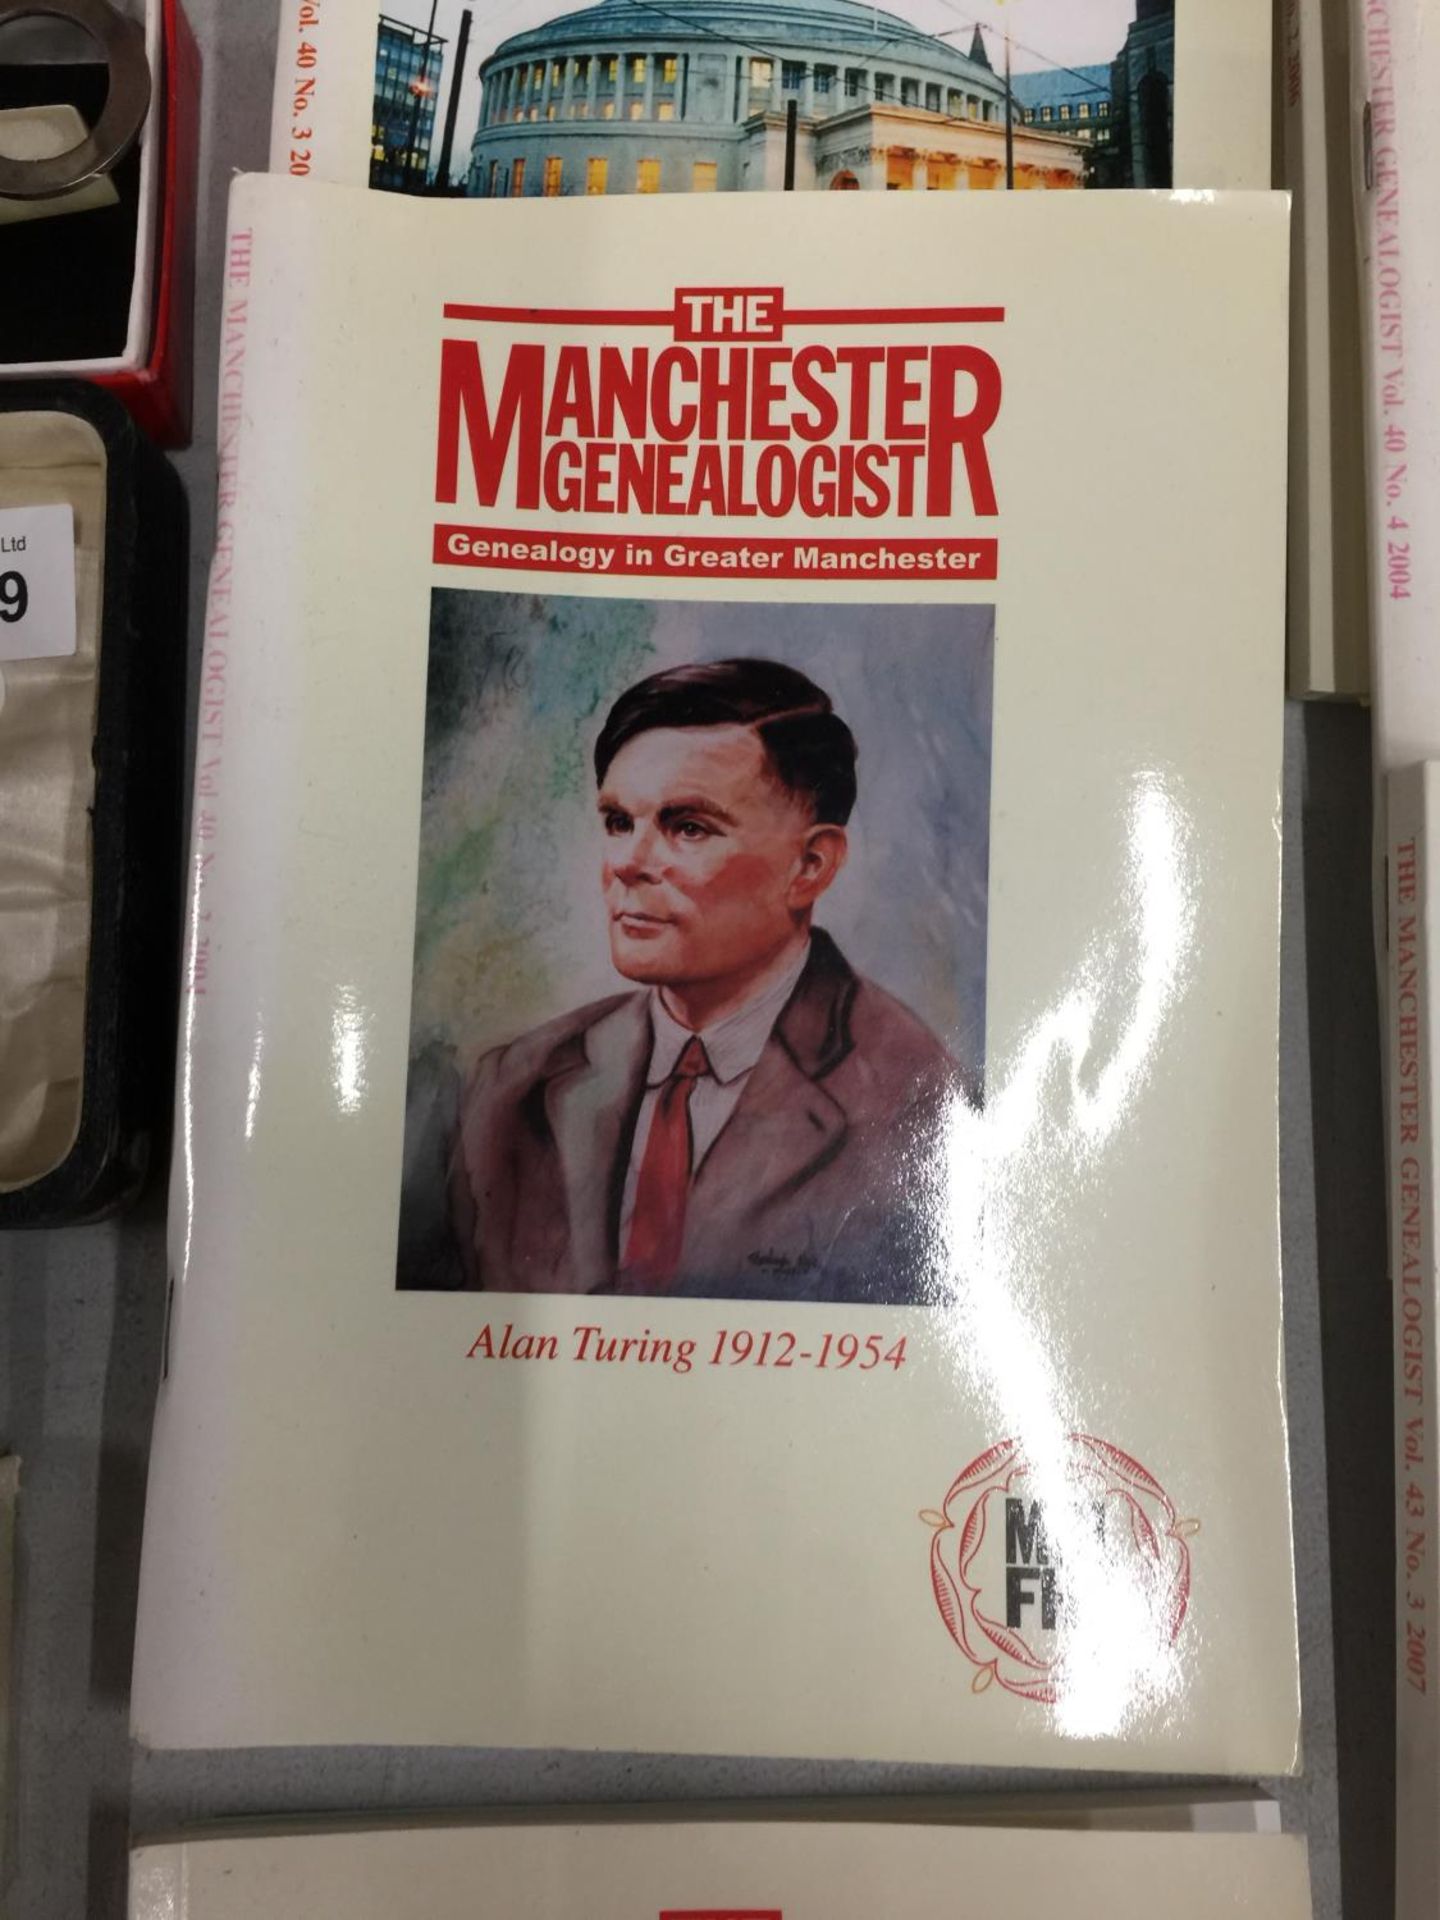 TWELVE BOOKS THE MANCHESTER GENEALOGIST GENEALOGY IN GREATER MANCHESTER - Image 2 of 4